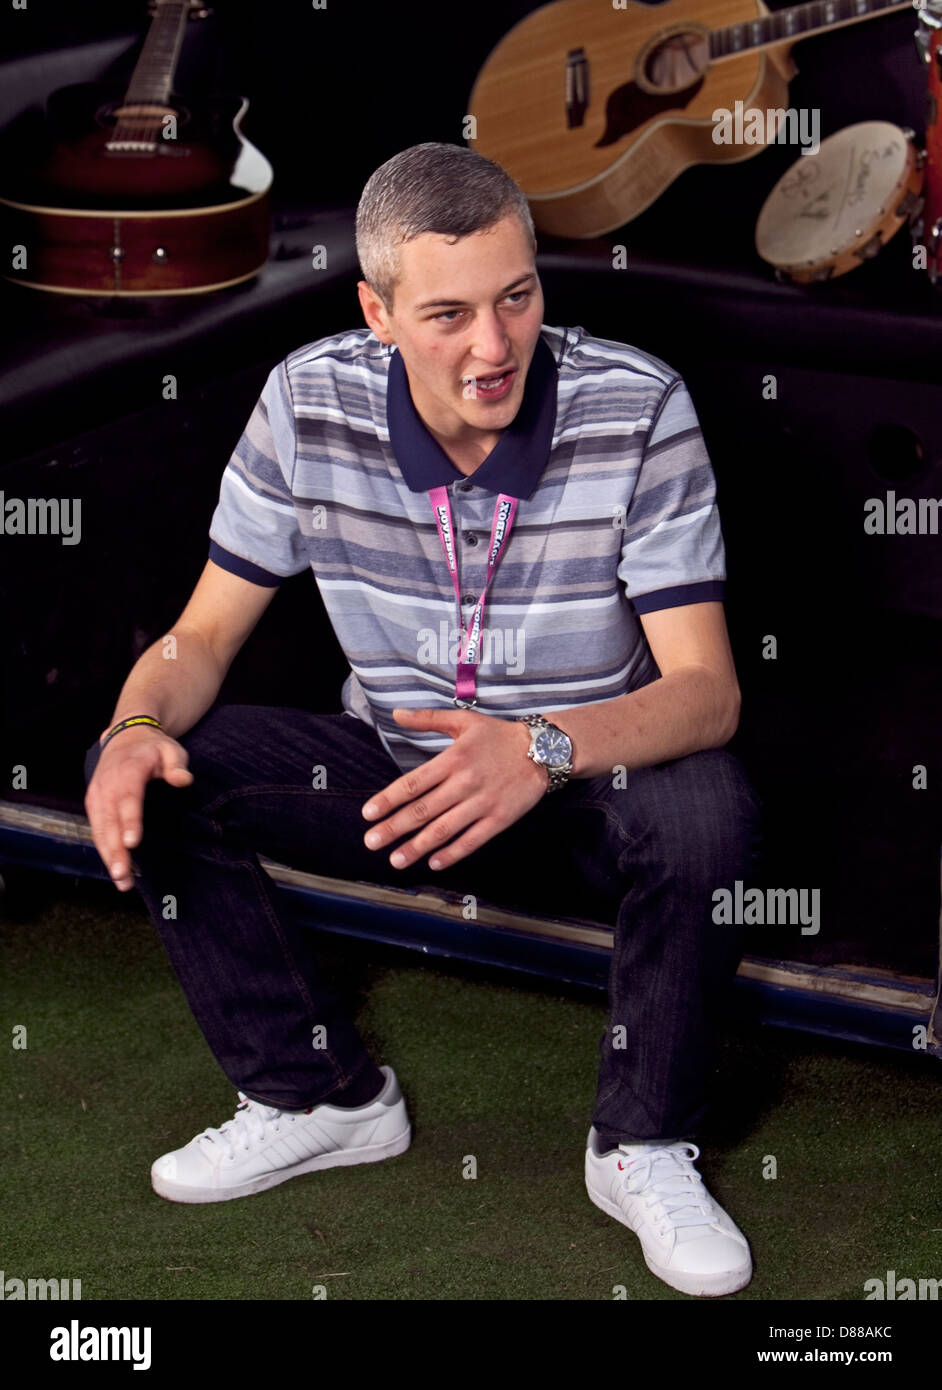 RAPPER, James Devlin, better known mononymously as Devlin INTERVIEWED BACKSTAGE AT LOVEBOX FESTIVAL, LONDON, 2012 Stock Photo